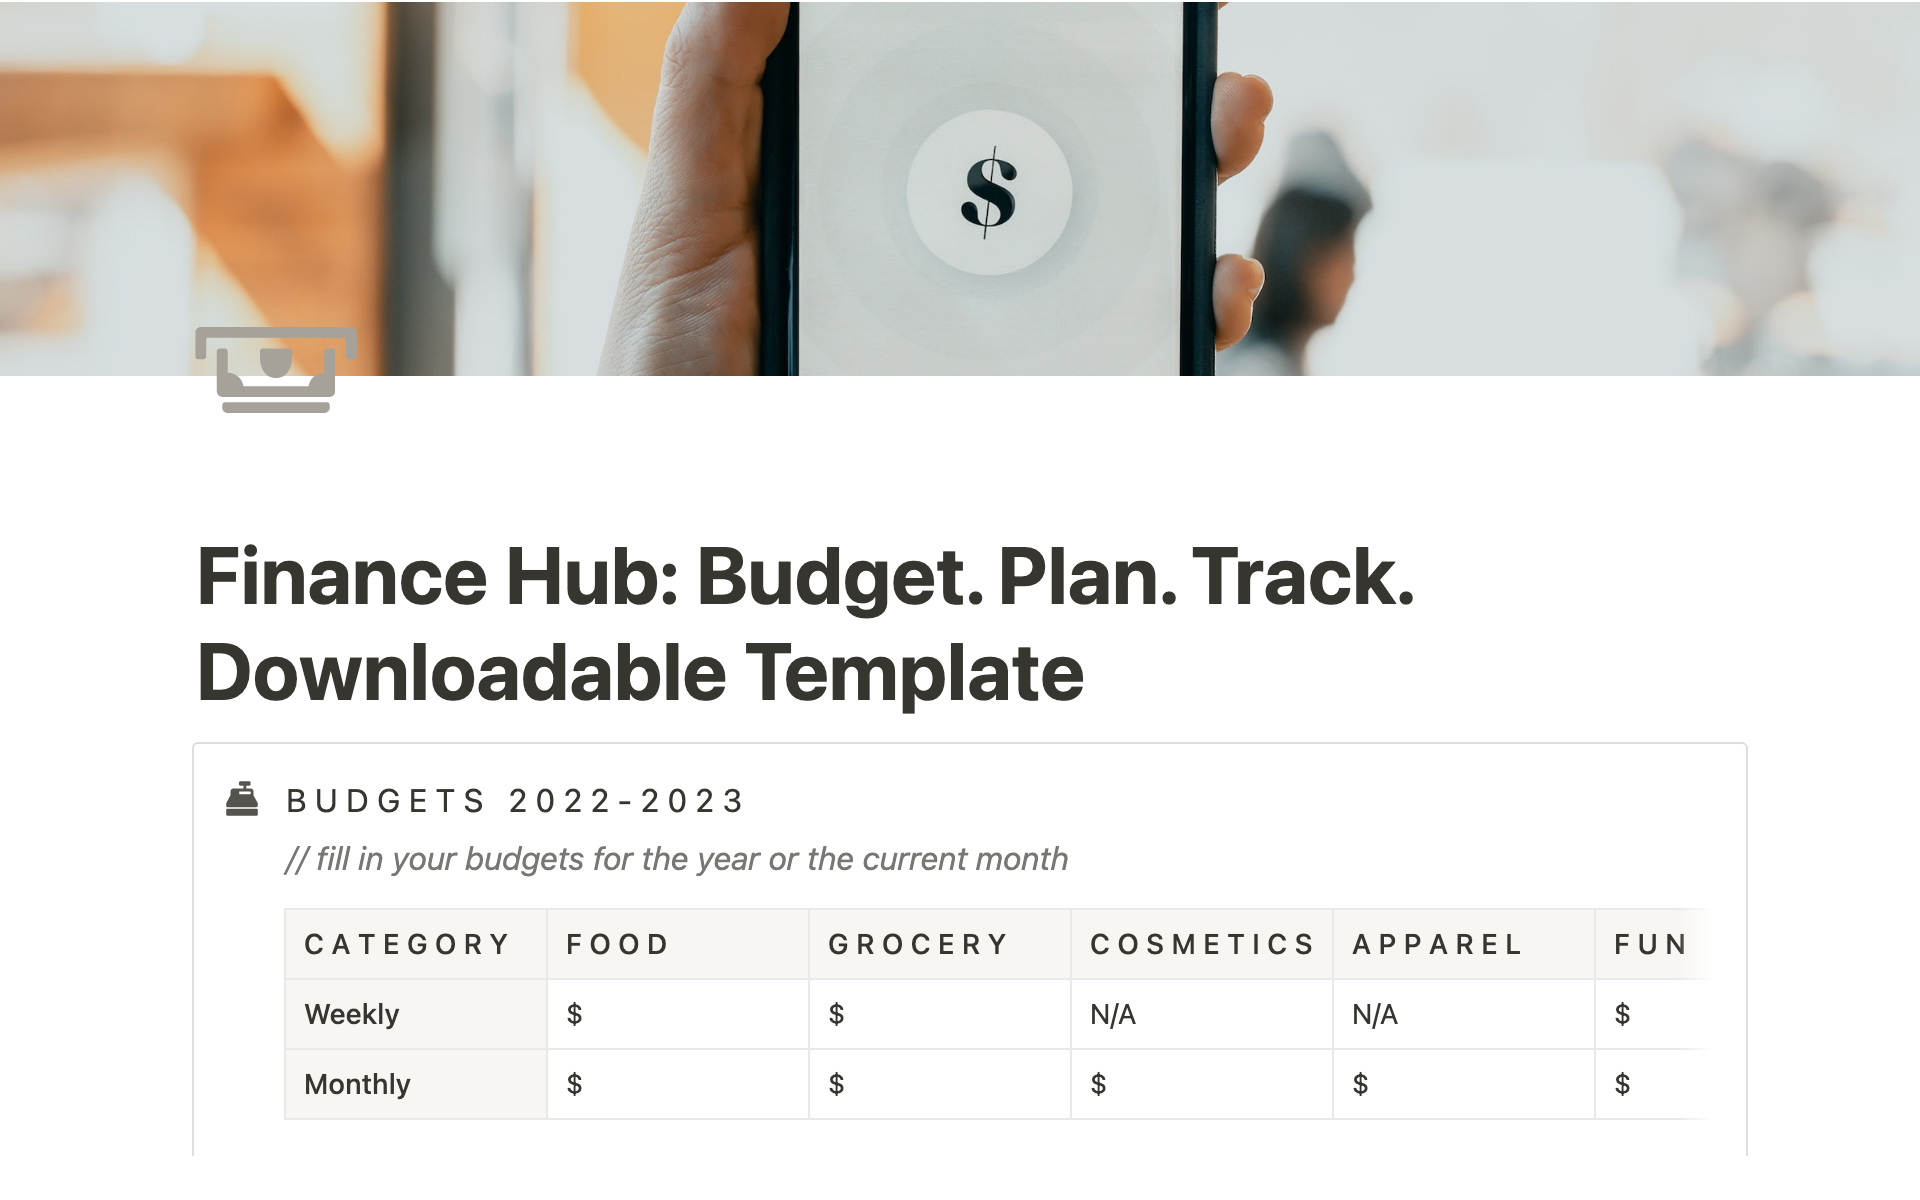 Budget, plan, and track your finances to save and grow!